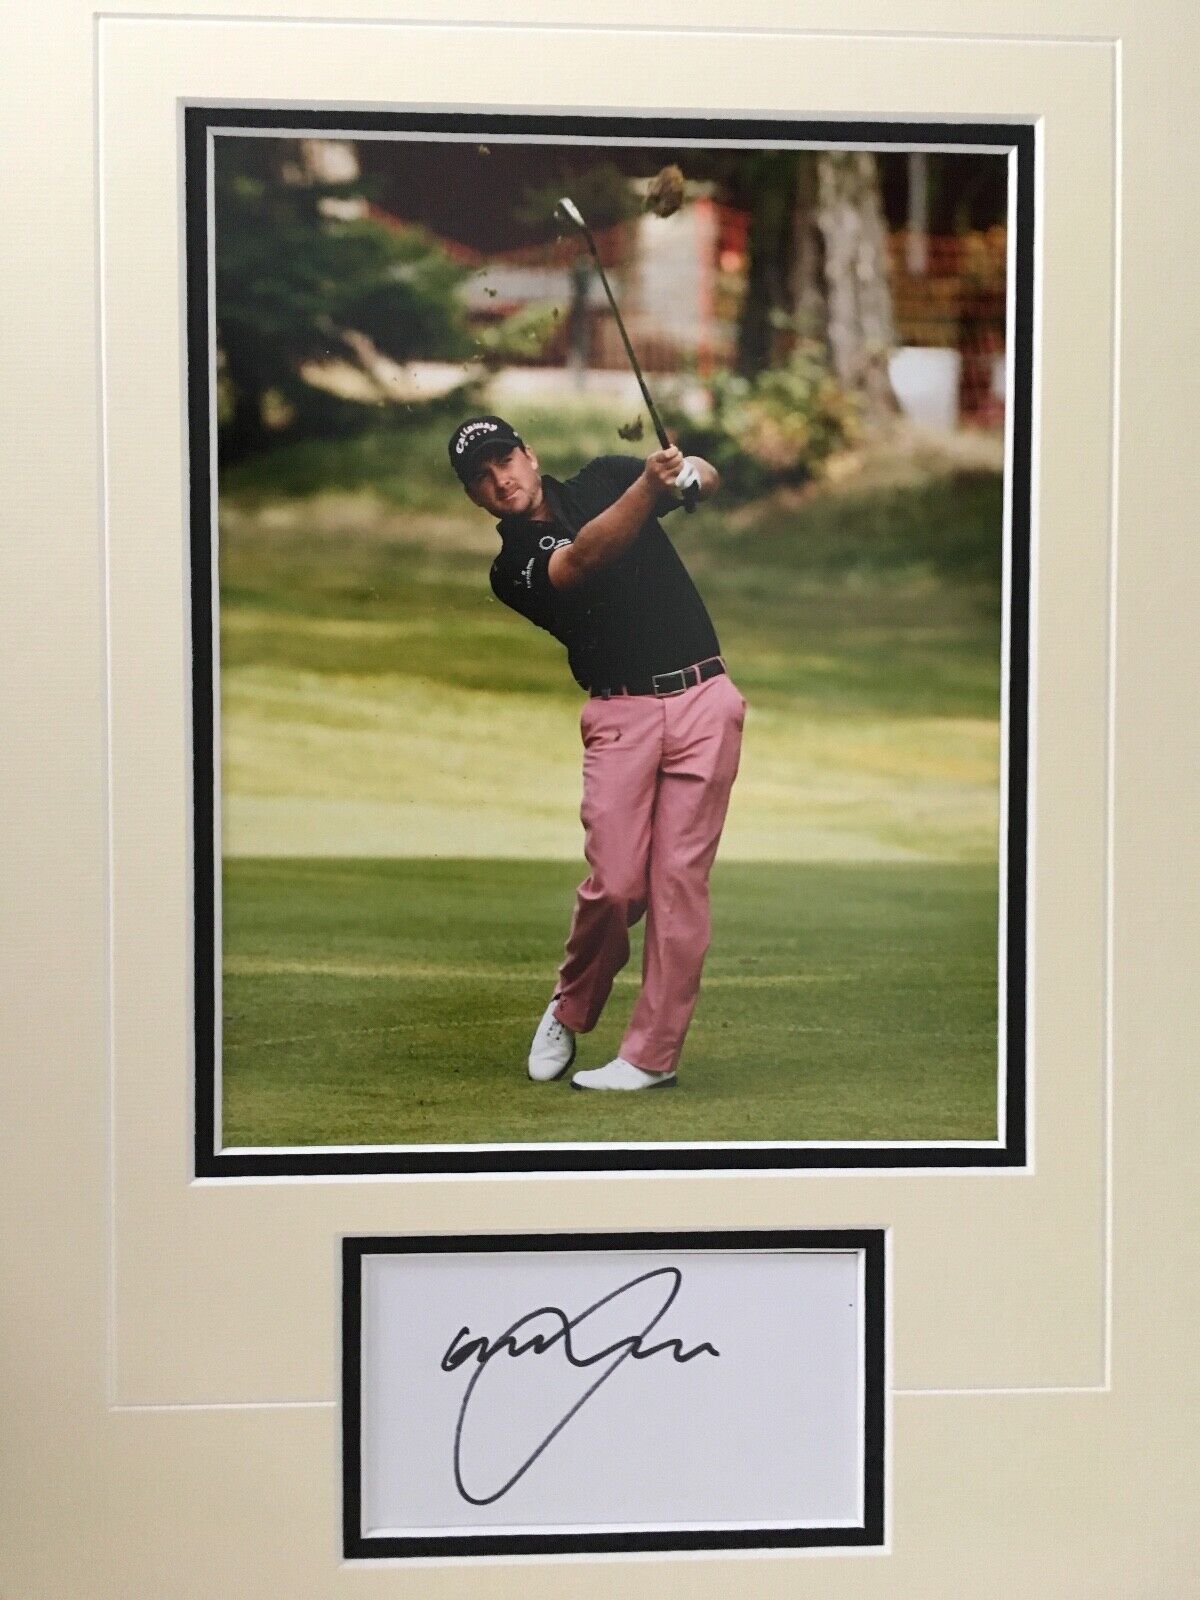 GRAEME McDOWELL - GREAT IRISH GOLFER - SIGNED COLOUR Photo Poster painting DISPLAY